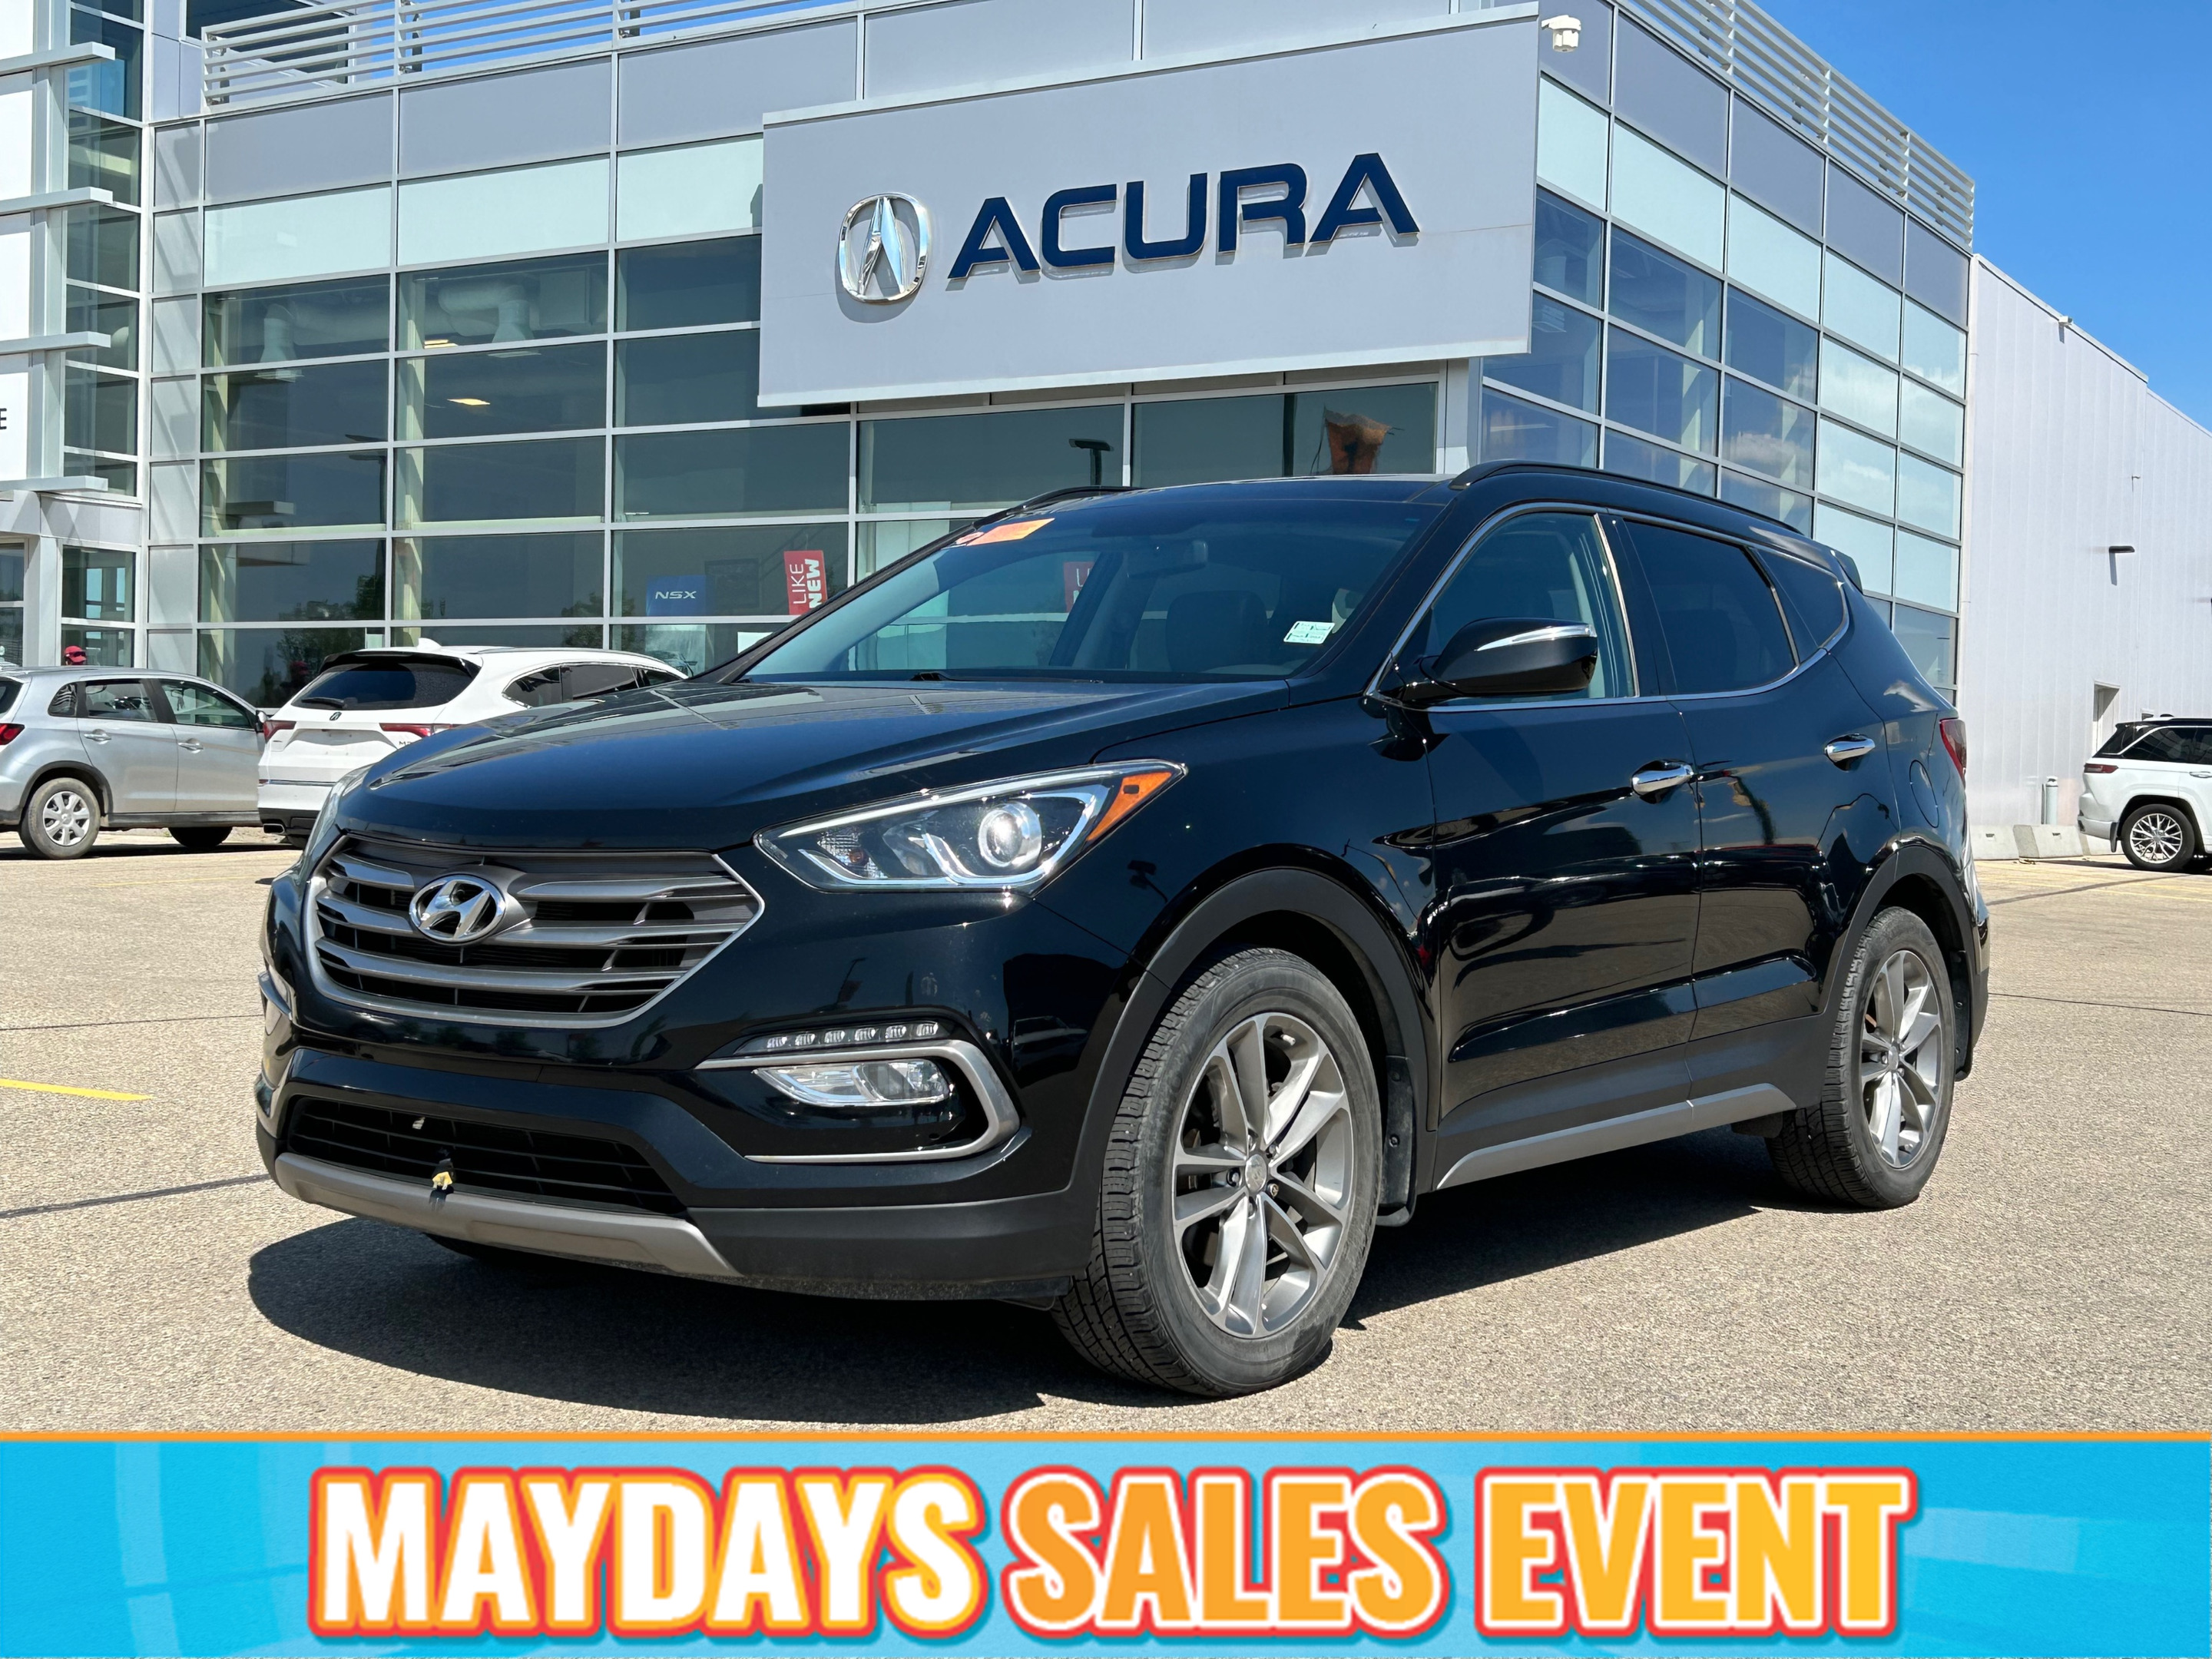 2017 Hyundai Santa Fe Sport comfort and style all in one